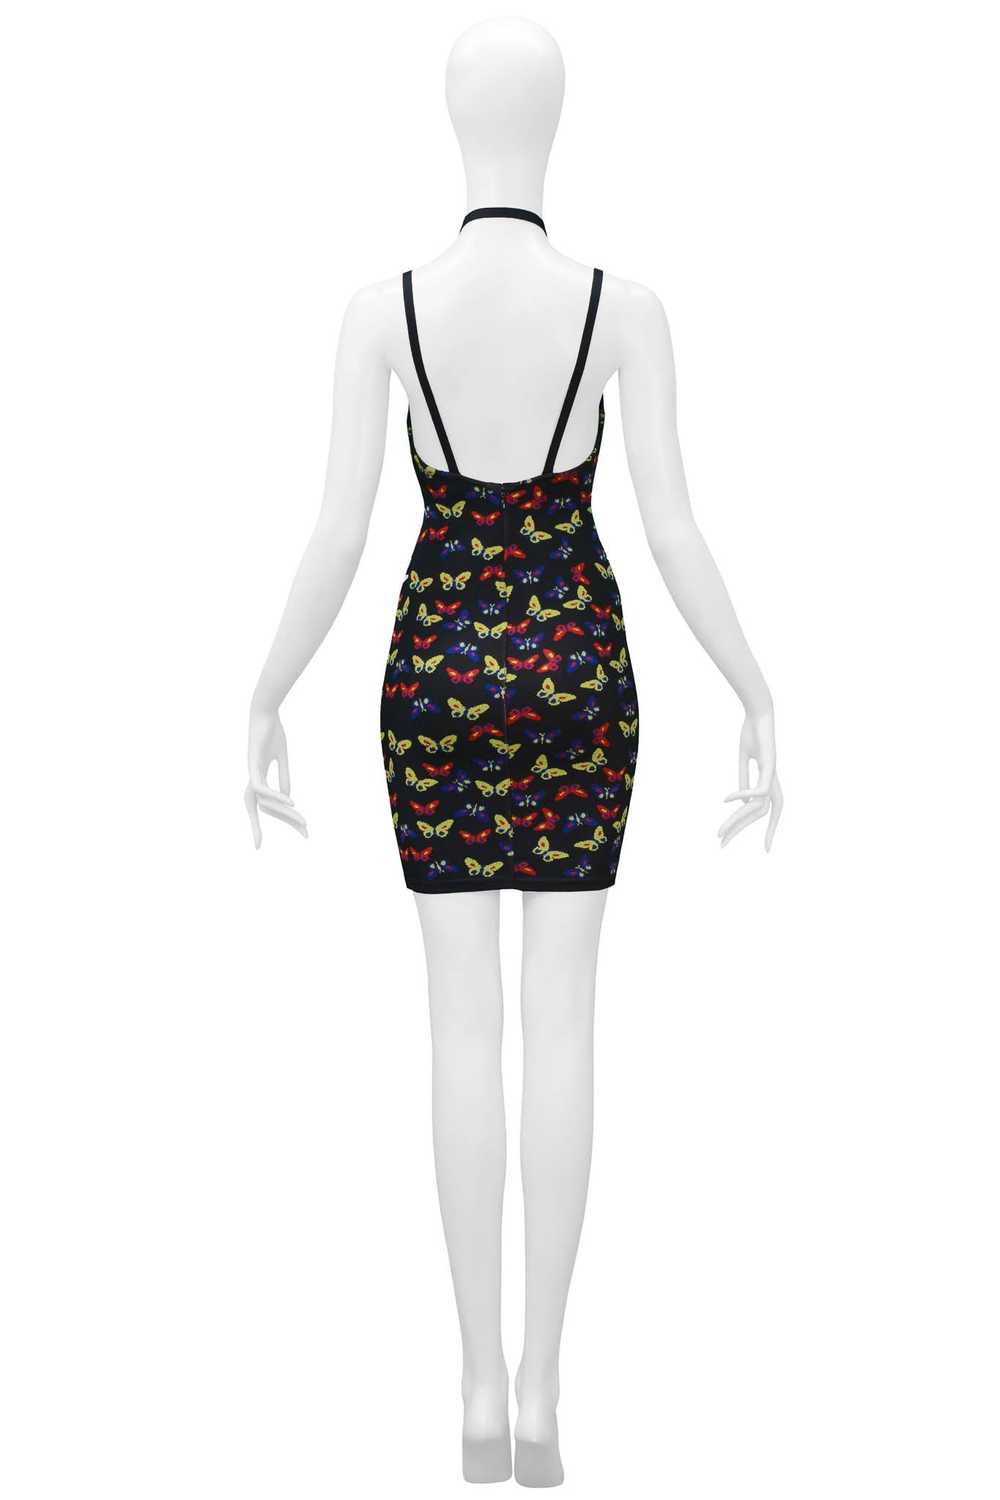 ALAIA ICONIC BUTTERFLY PRINT KNIT DRESS 1991 - image 7